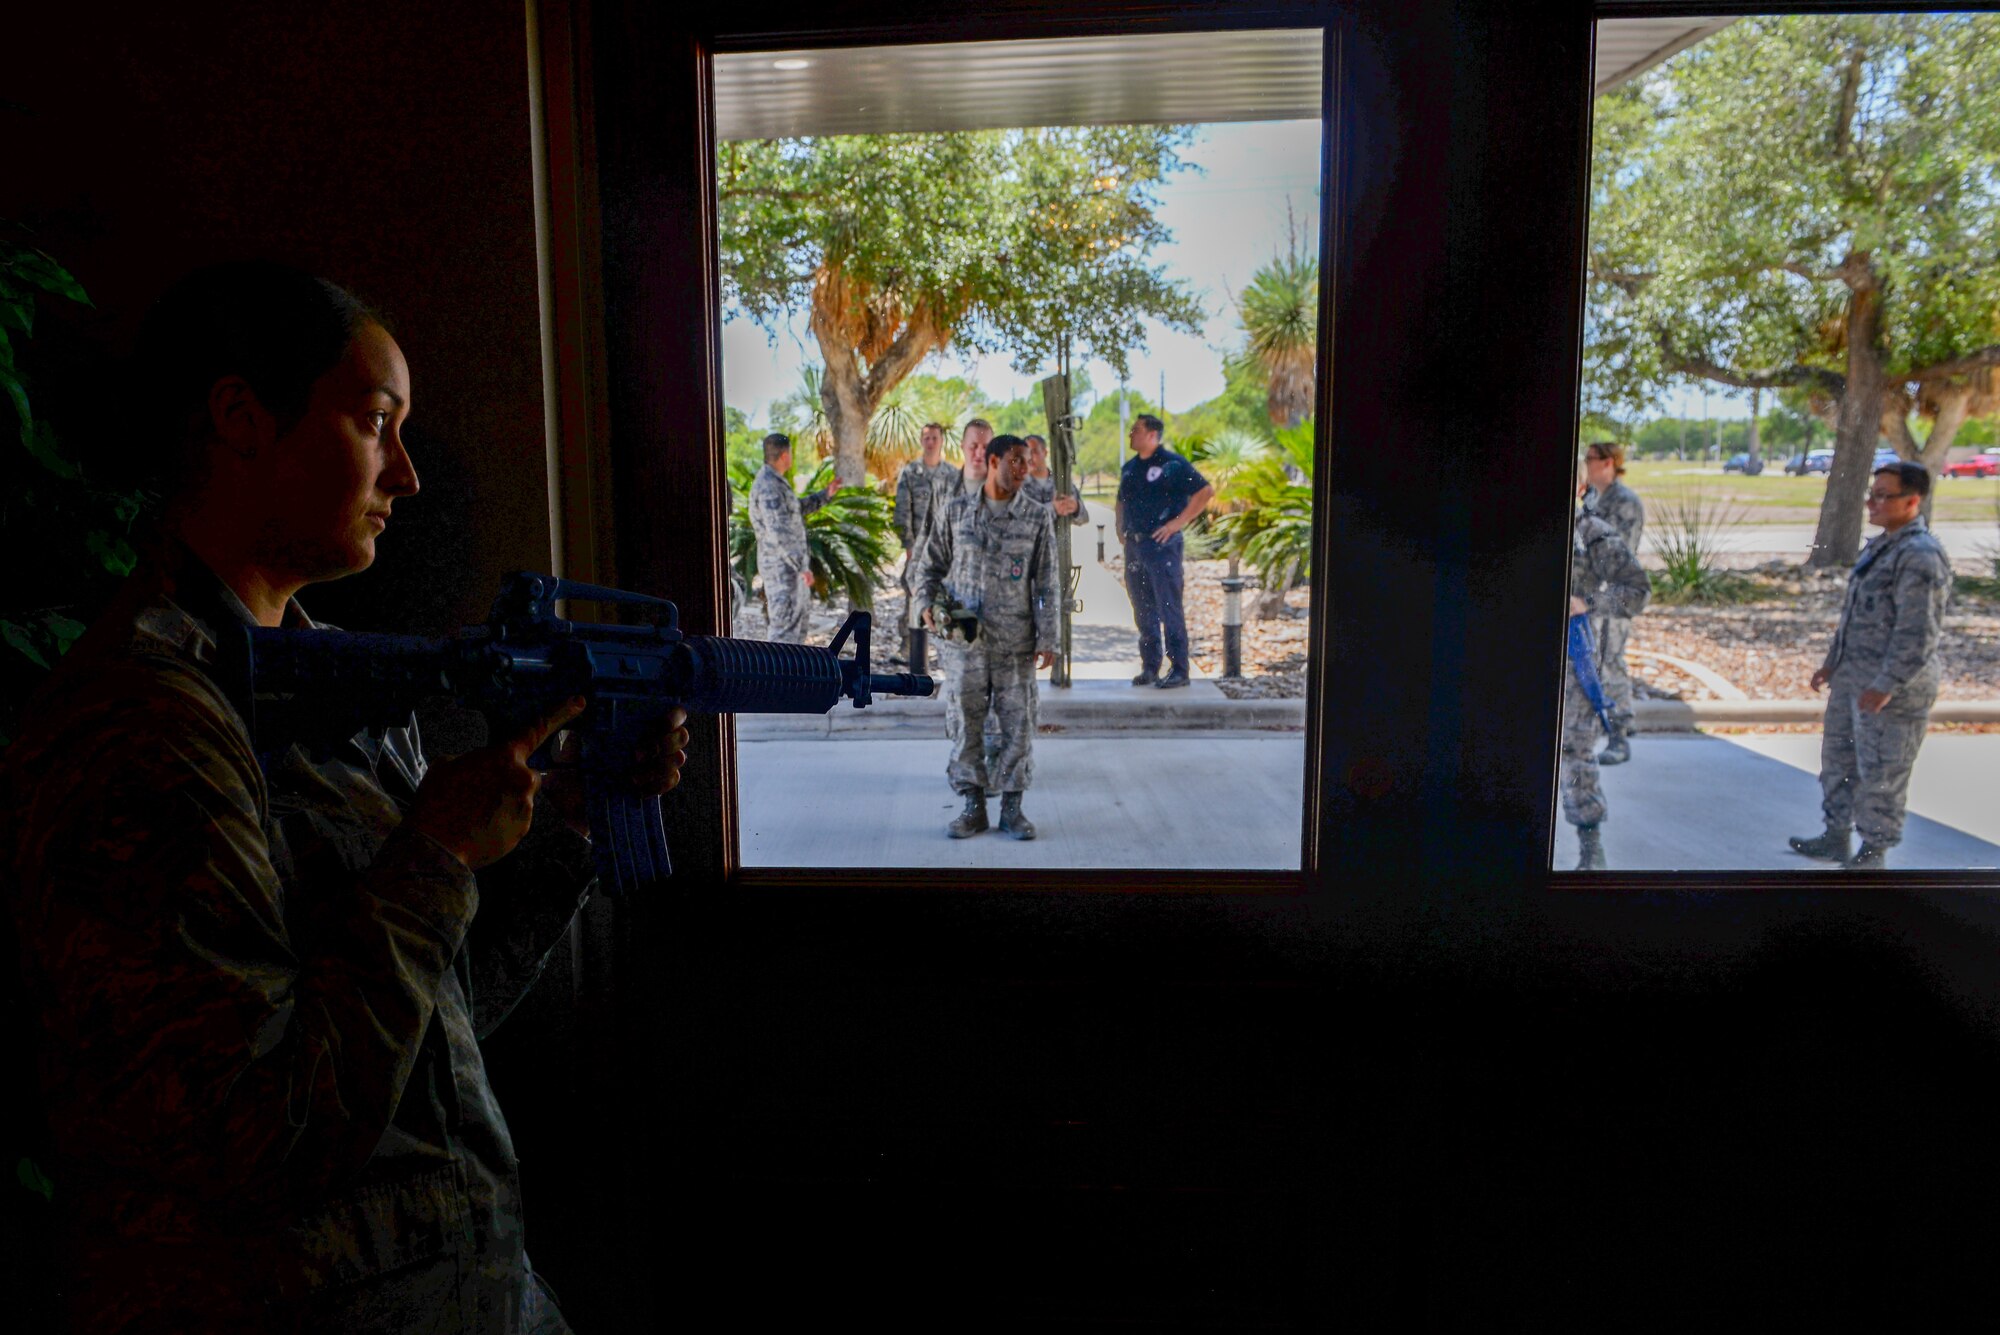 Senior Airman Ashley Knowland, 47th Security Forces Squadron patrolman, keeps watch during a training scenario at Laughlin Air Force Base, Texas, Aug. 1, 2018. The 47th SFS, along with the 47th Civil Engineer Squadron firefighters, recently started training with a new and improved process aimed at cutting down response time to active shooter scenarios. (U.S. Air Force photo by Senior Airman Benjamin N. Valmoja)